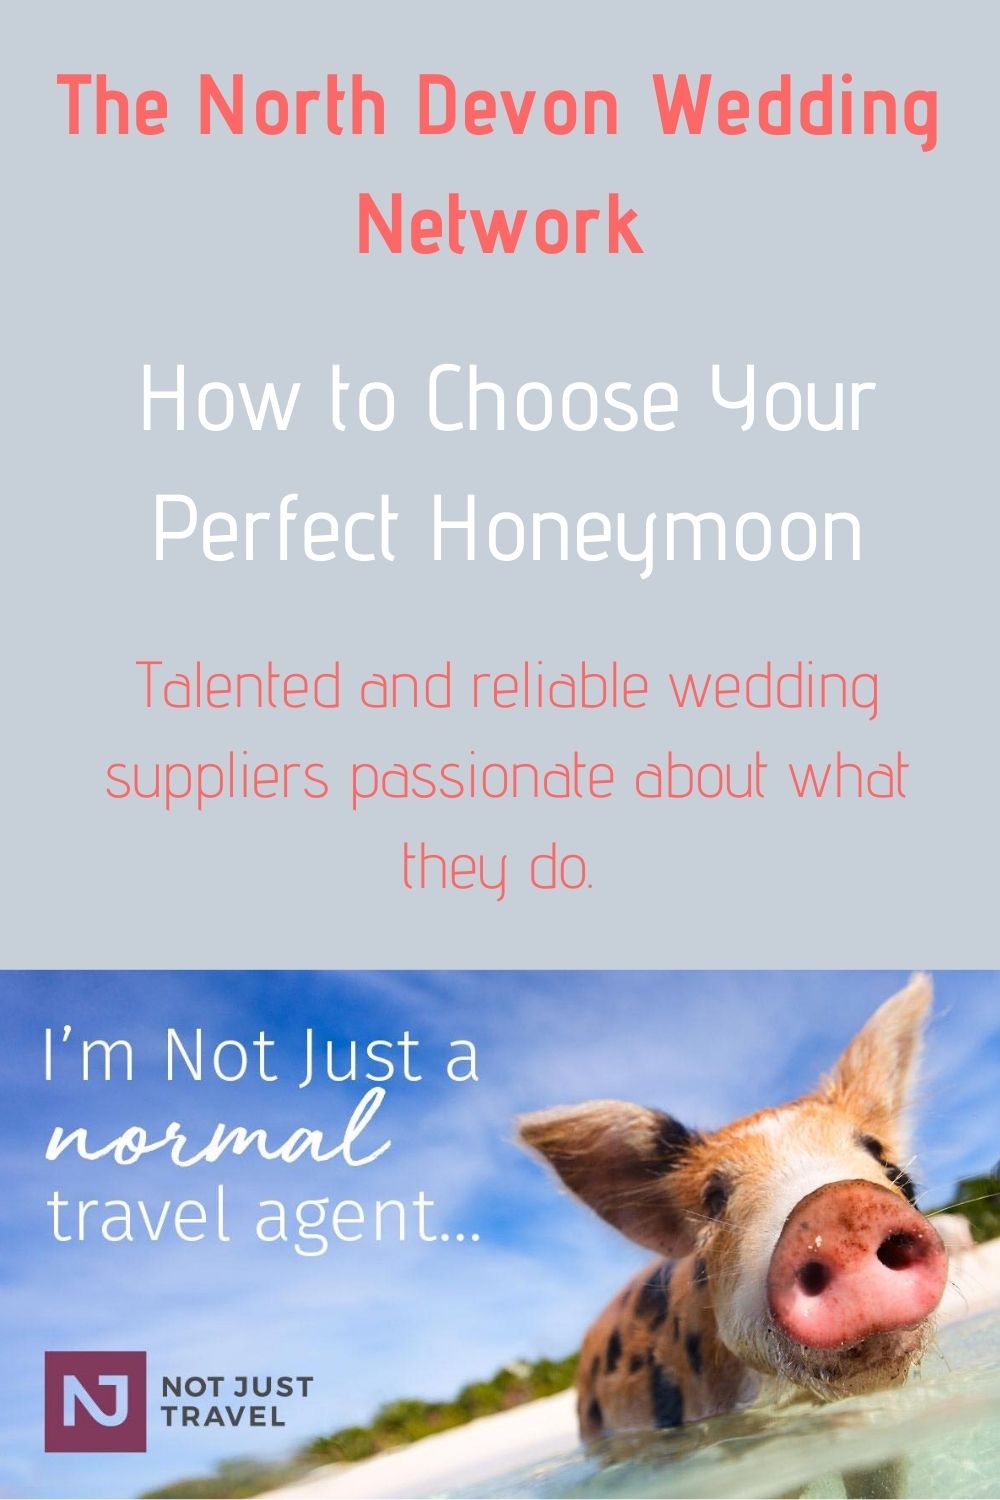 How to choose your perfect honeymoon